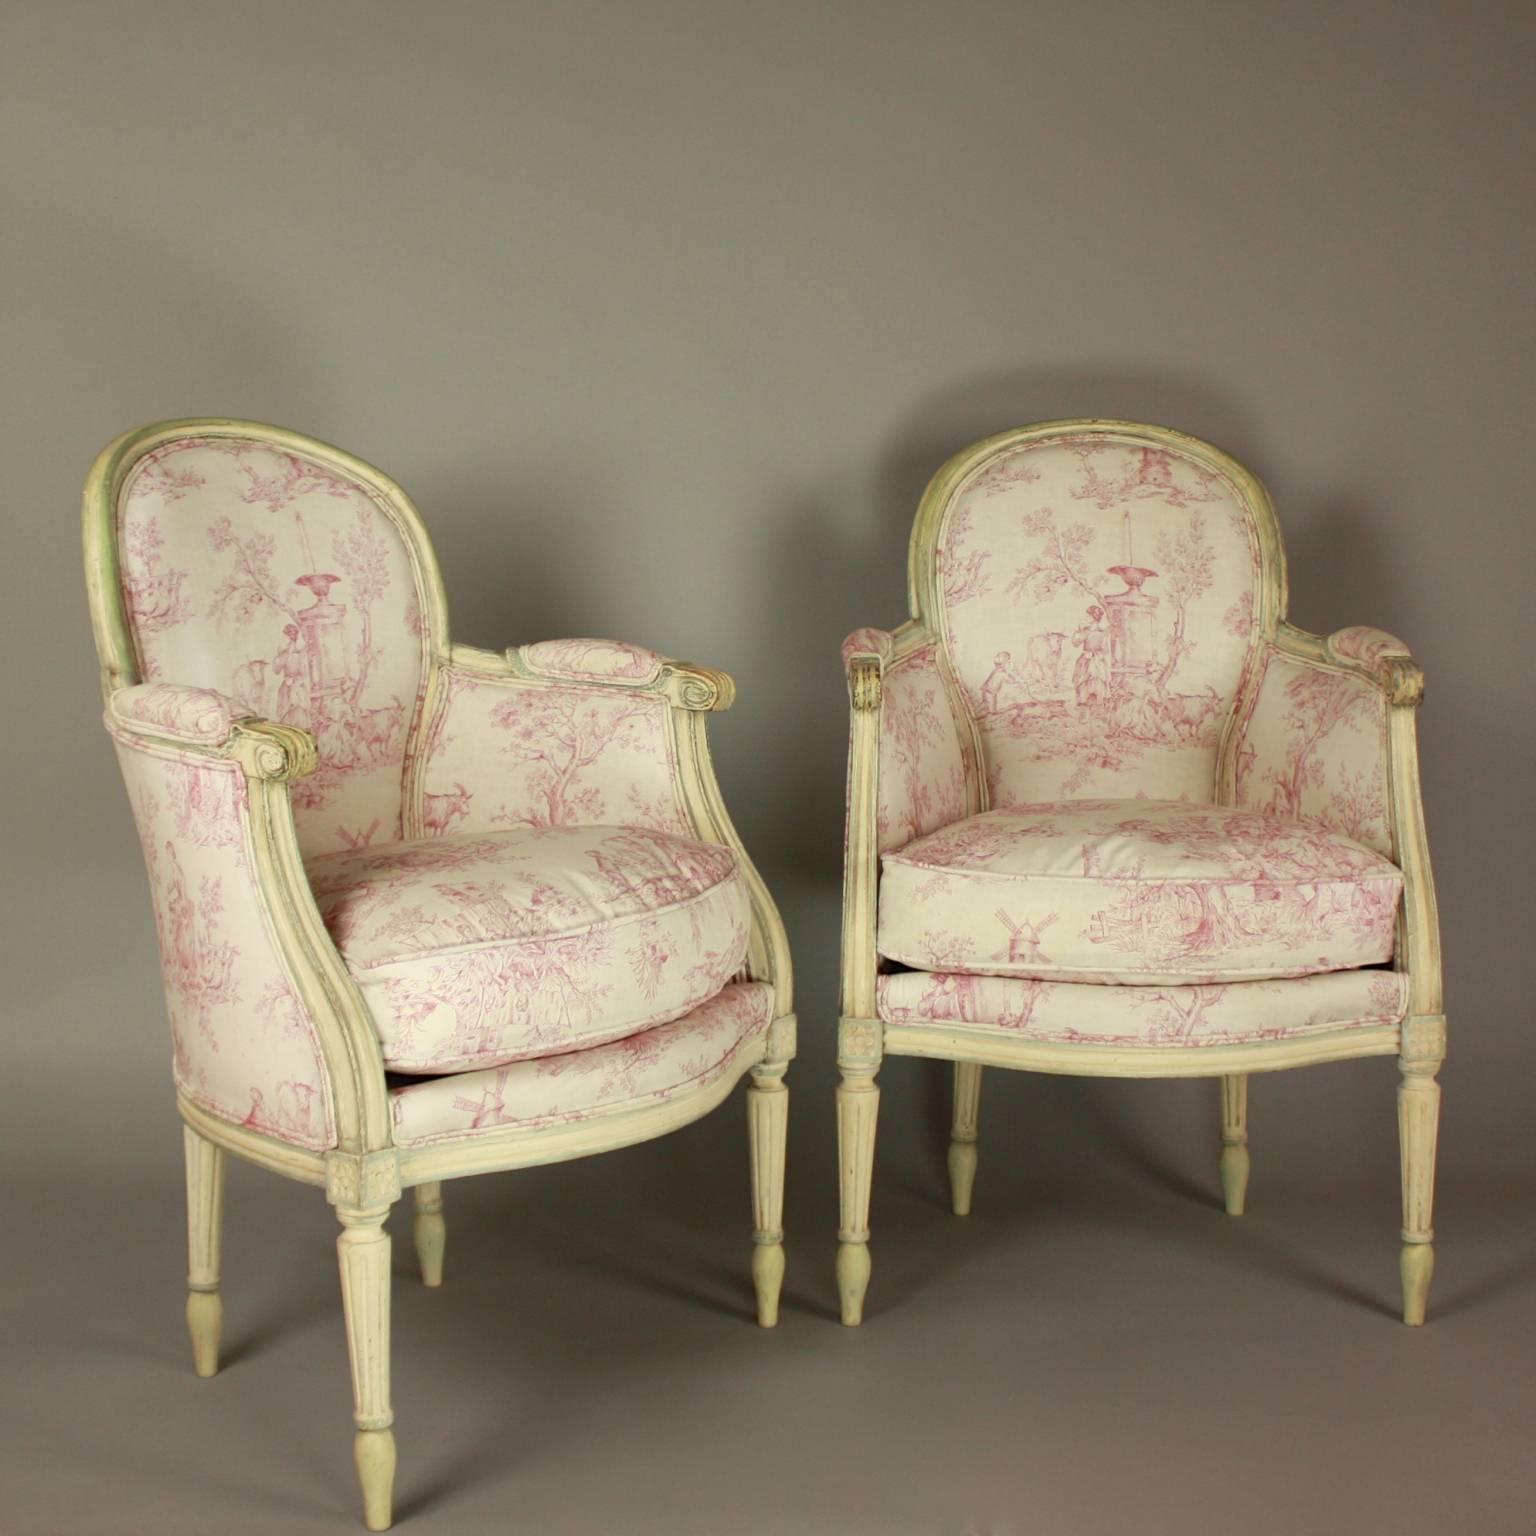 Pair of French 19th Century Louis XVI Style Painted Wood Armchairs or Bèrgères

A pair of small Louis XVI style armchairs or 'bergeres en cabriolet' from the late 19th century. The carved paintwood bergeres with arched padded backs and loose cushion